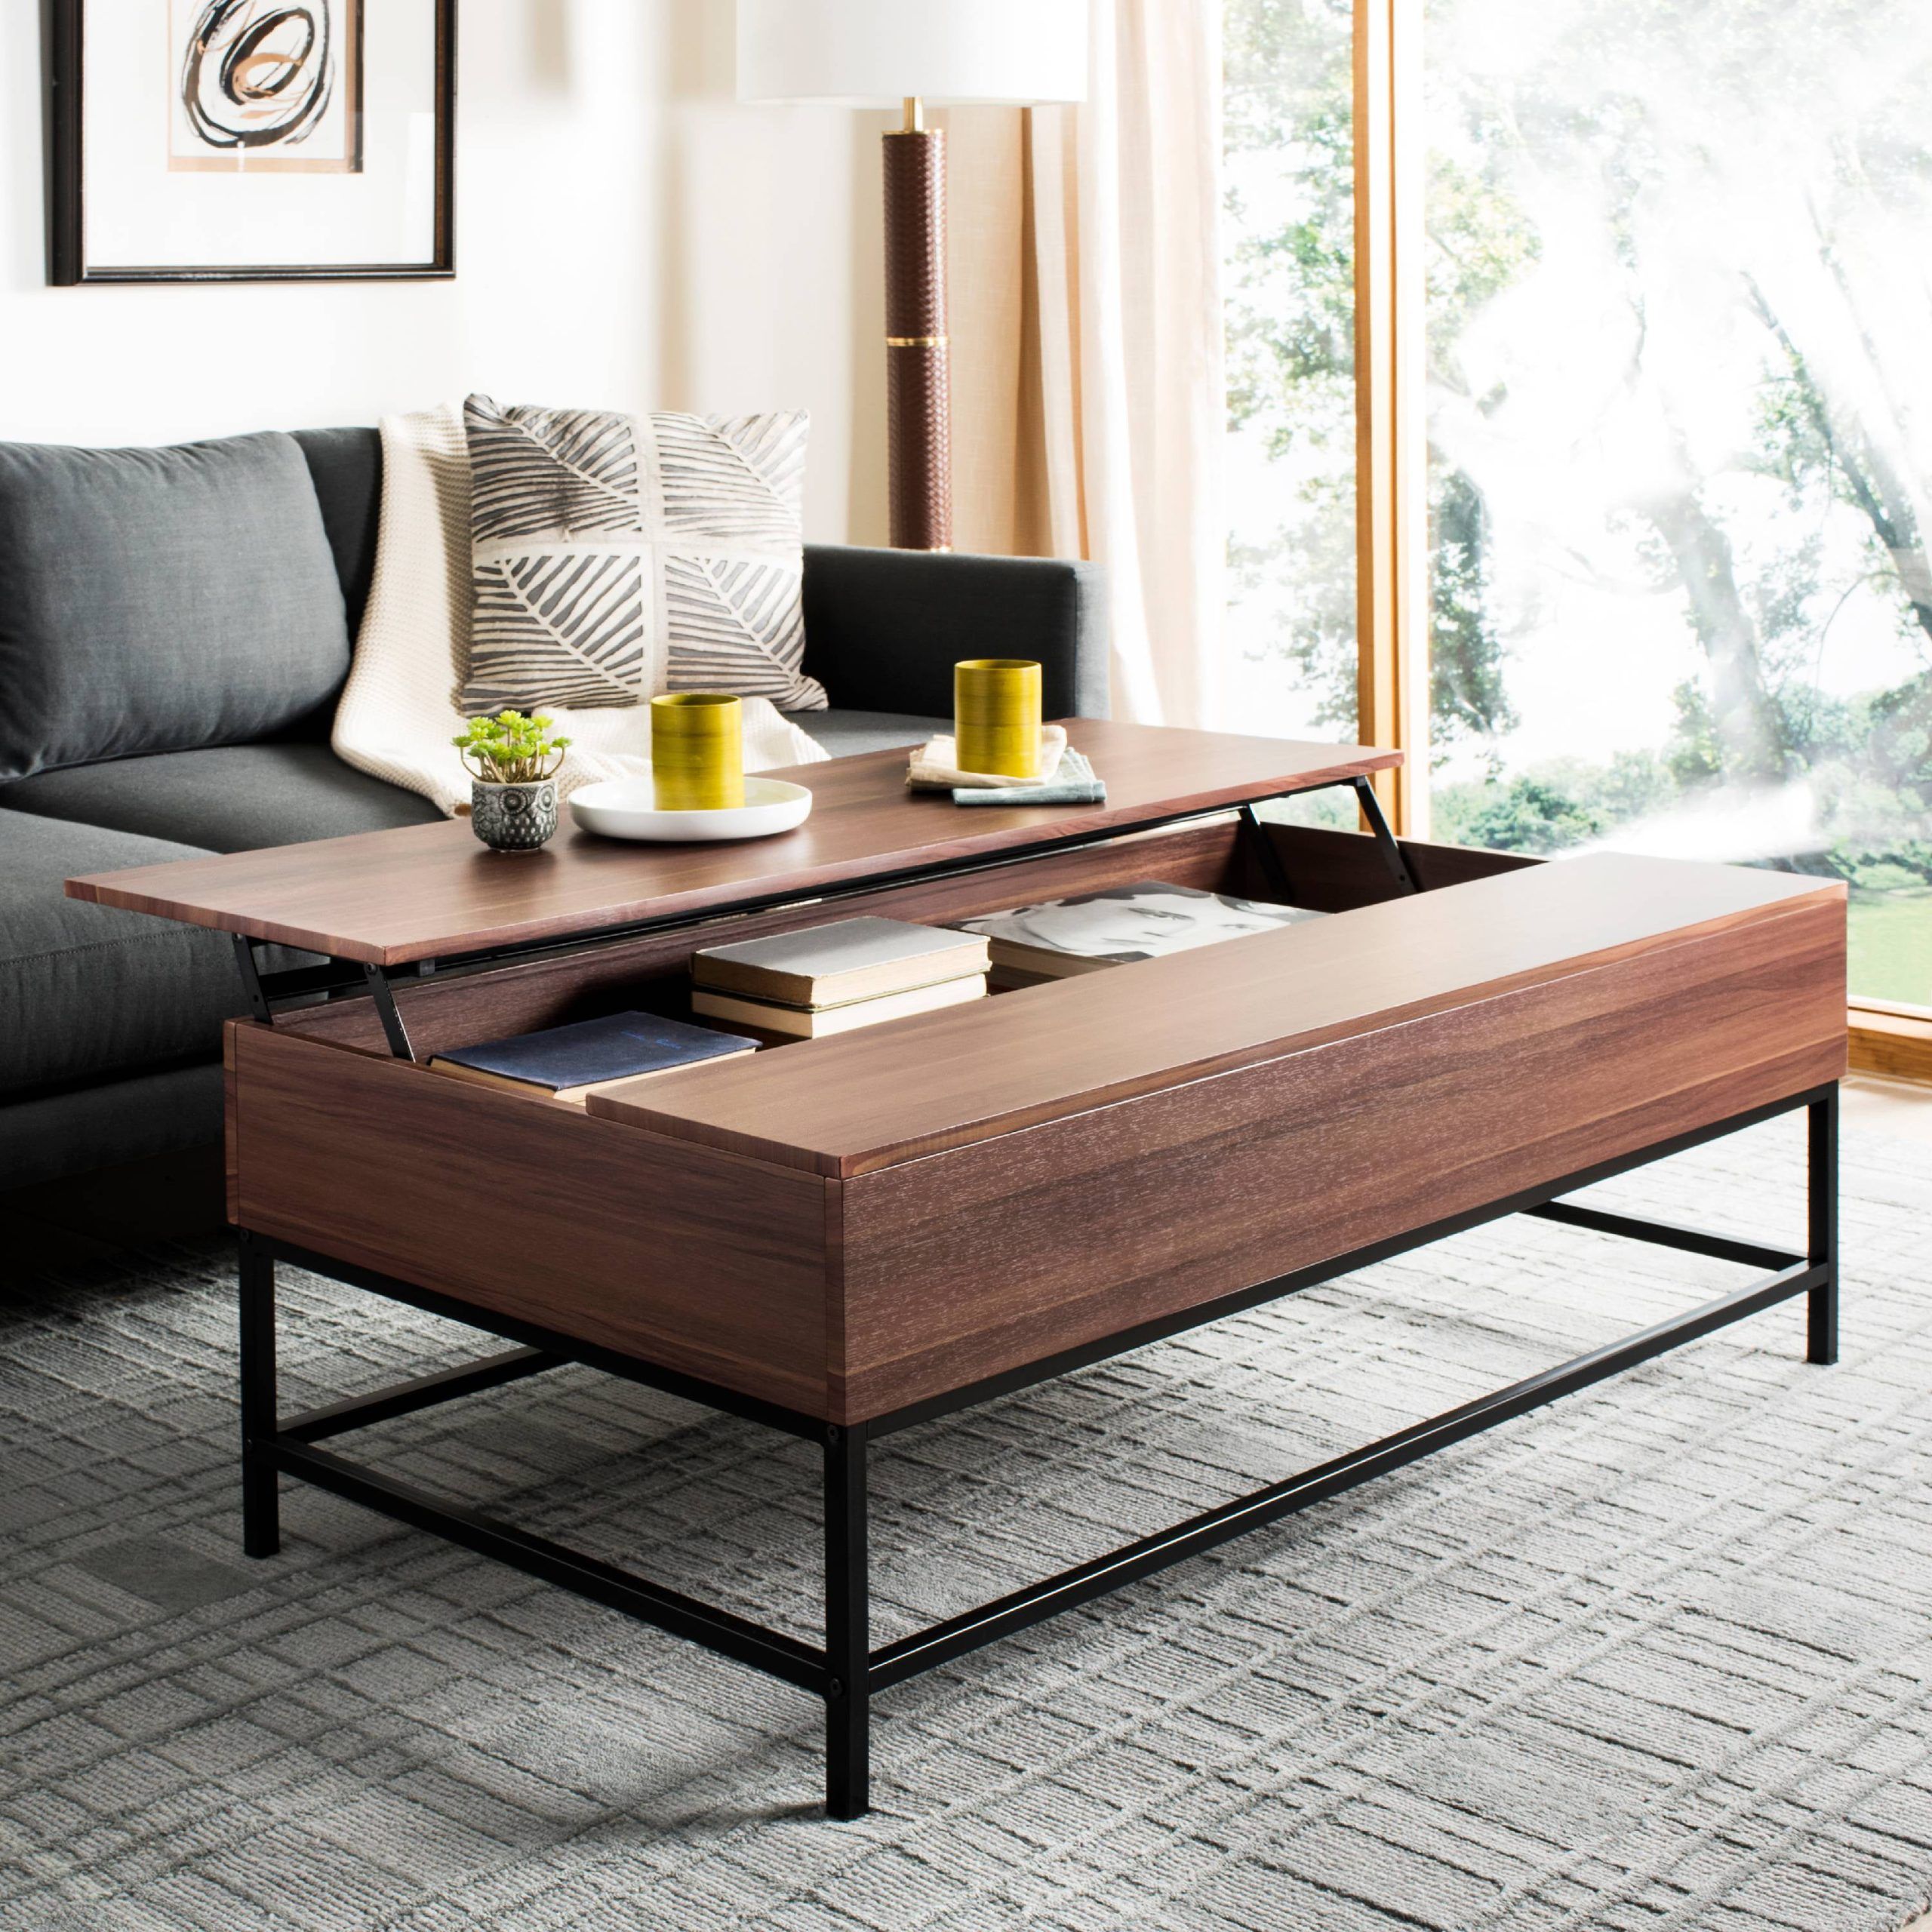 Safavieh Gina Contemporary Lift Top Coffee Table With Storage – Walmart With Regard To Coffee Tables With Storage (View 3 of 15)